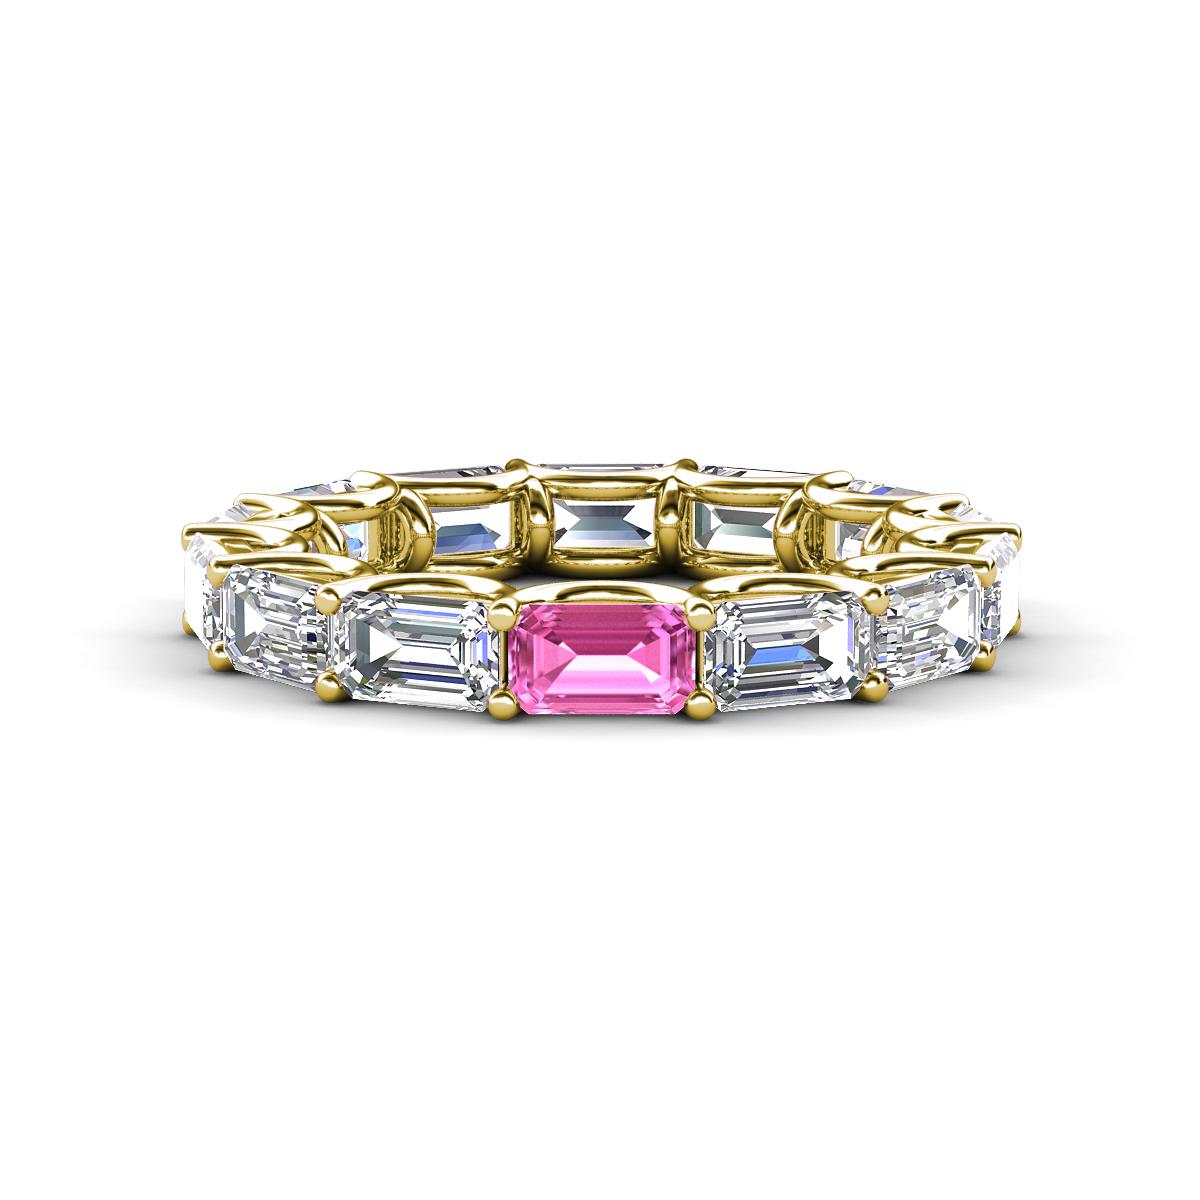 Beverly 5x3 mm Emerald Cut Natural Diamond and Pink Sapphire Eternity Band 